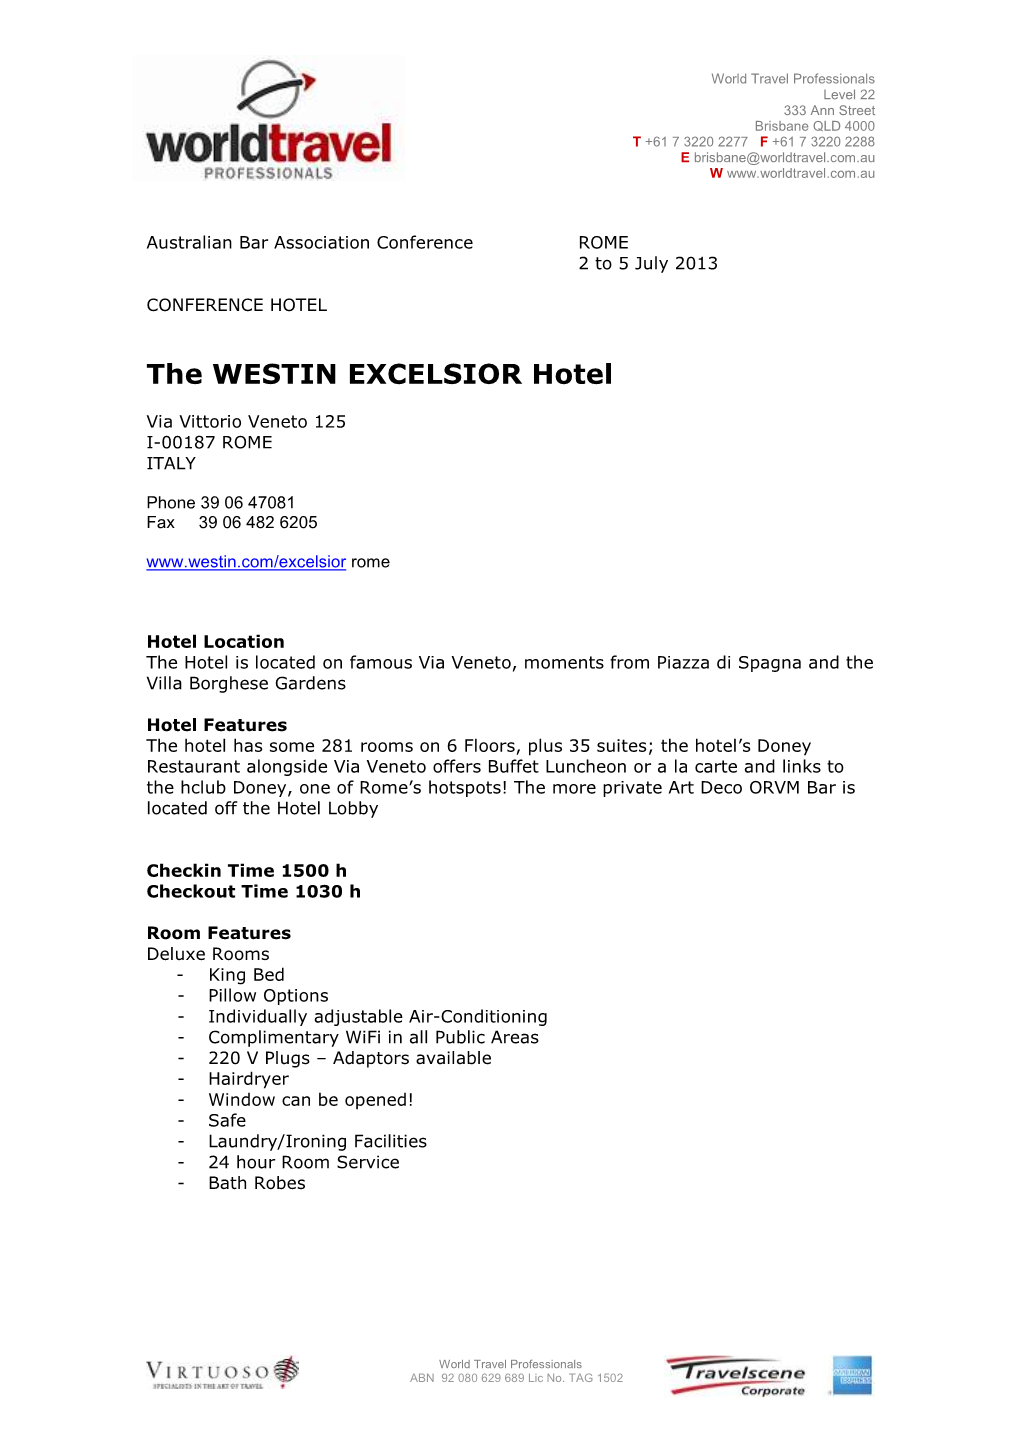 The WESTIN EXCELSIOR Hotel